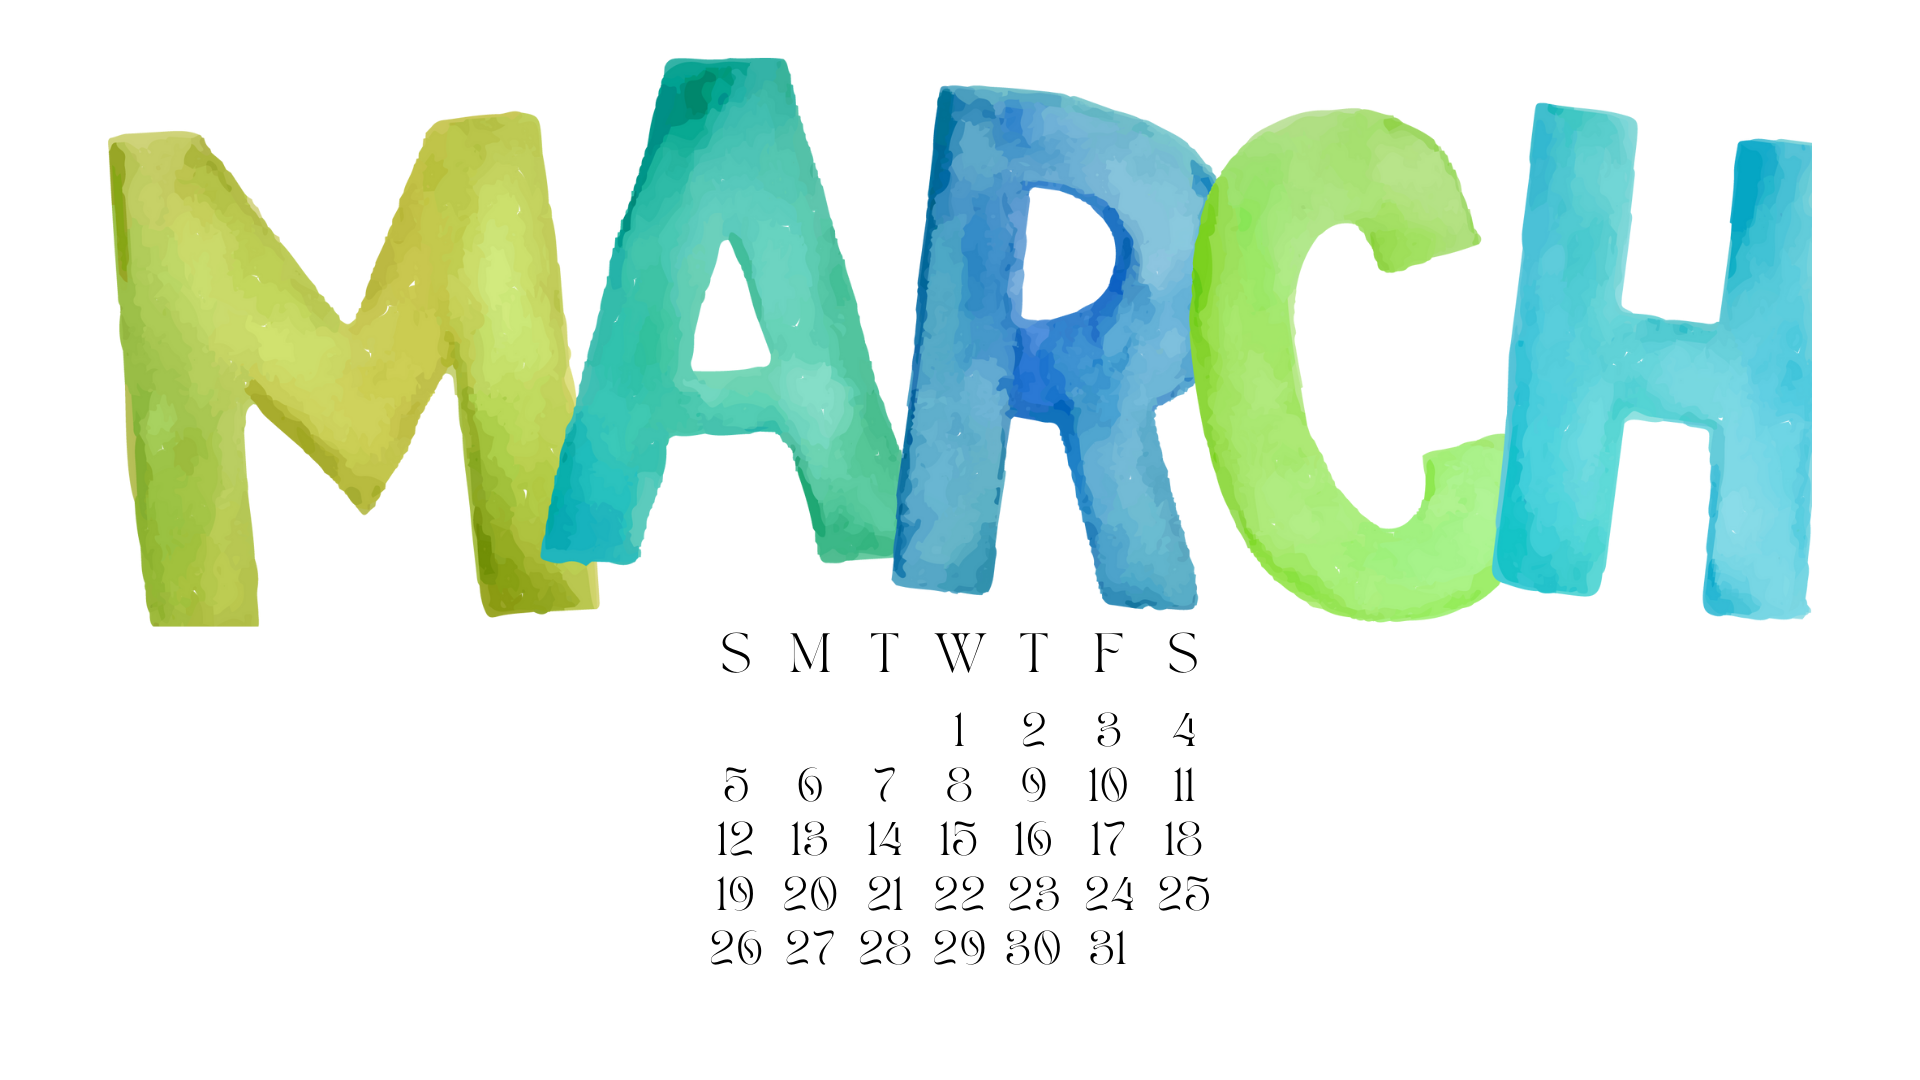 MARCH 2023 desktop calendar backgrounds;  Here are your free March backgrounds for computers and laptops. Tech freebies for this month!